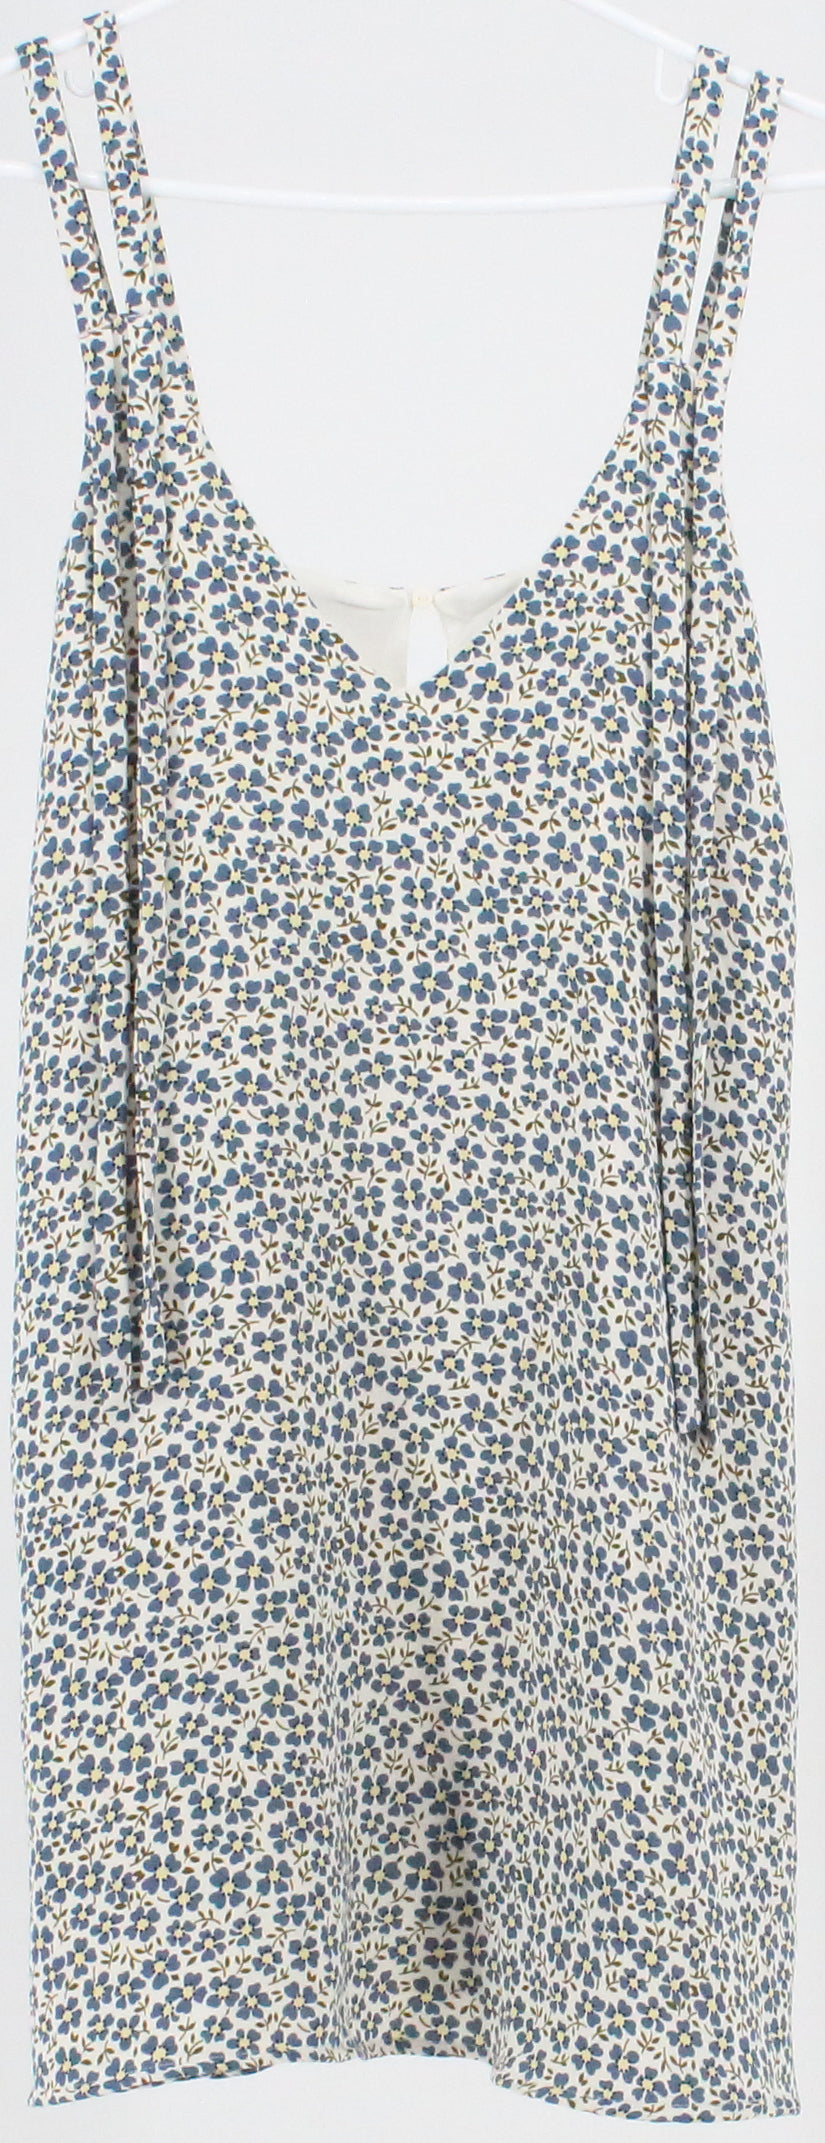 Zara Trafaluc Collection Off White and Blue Flower Print Dress